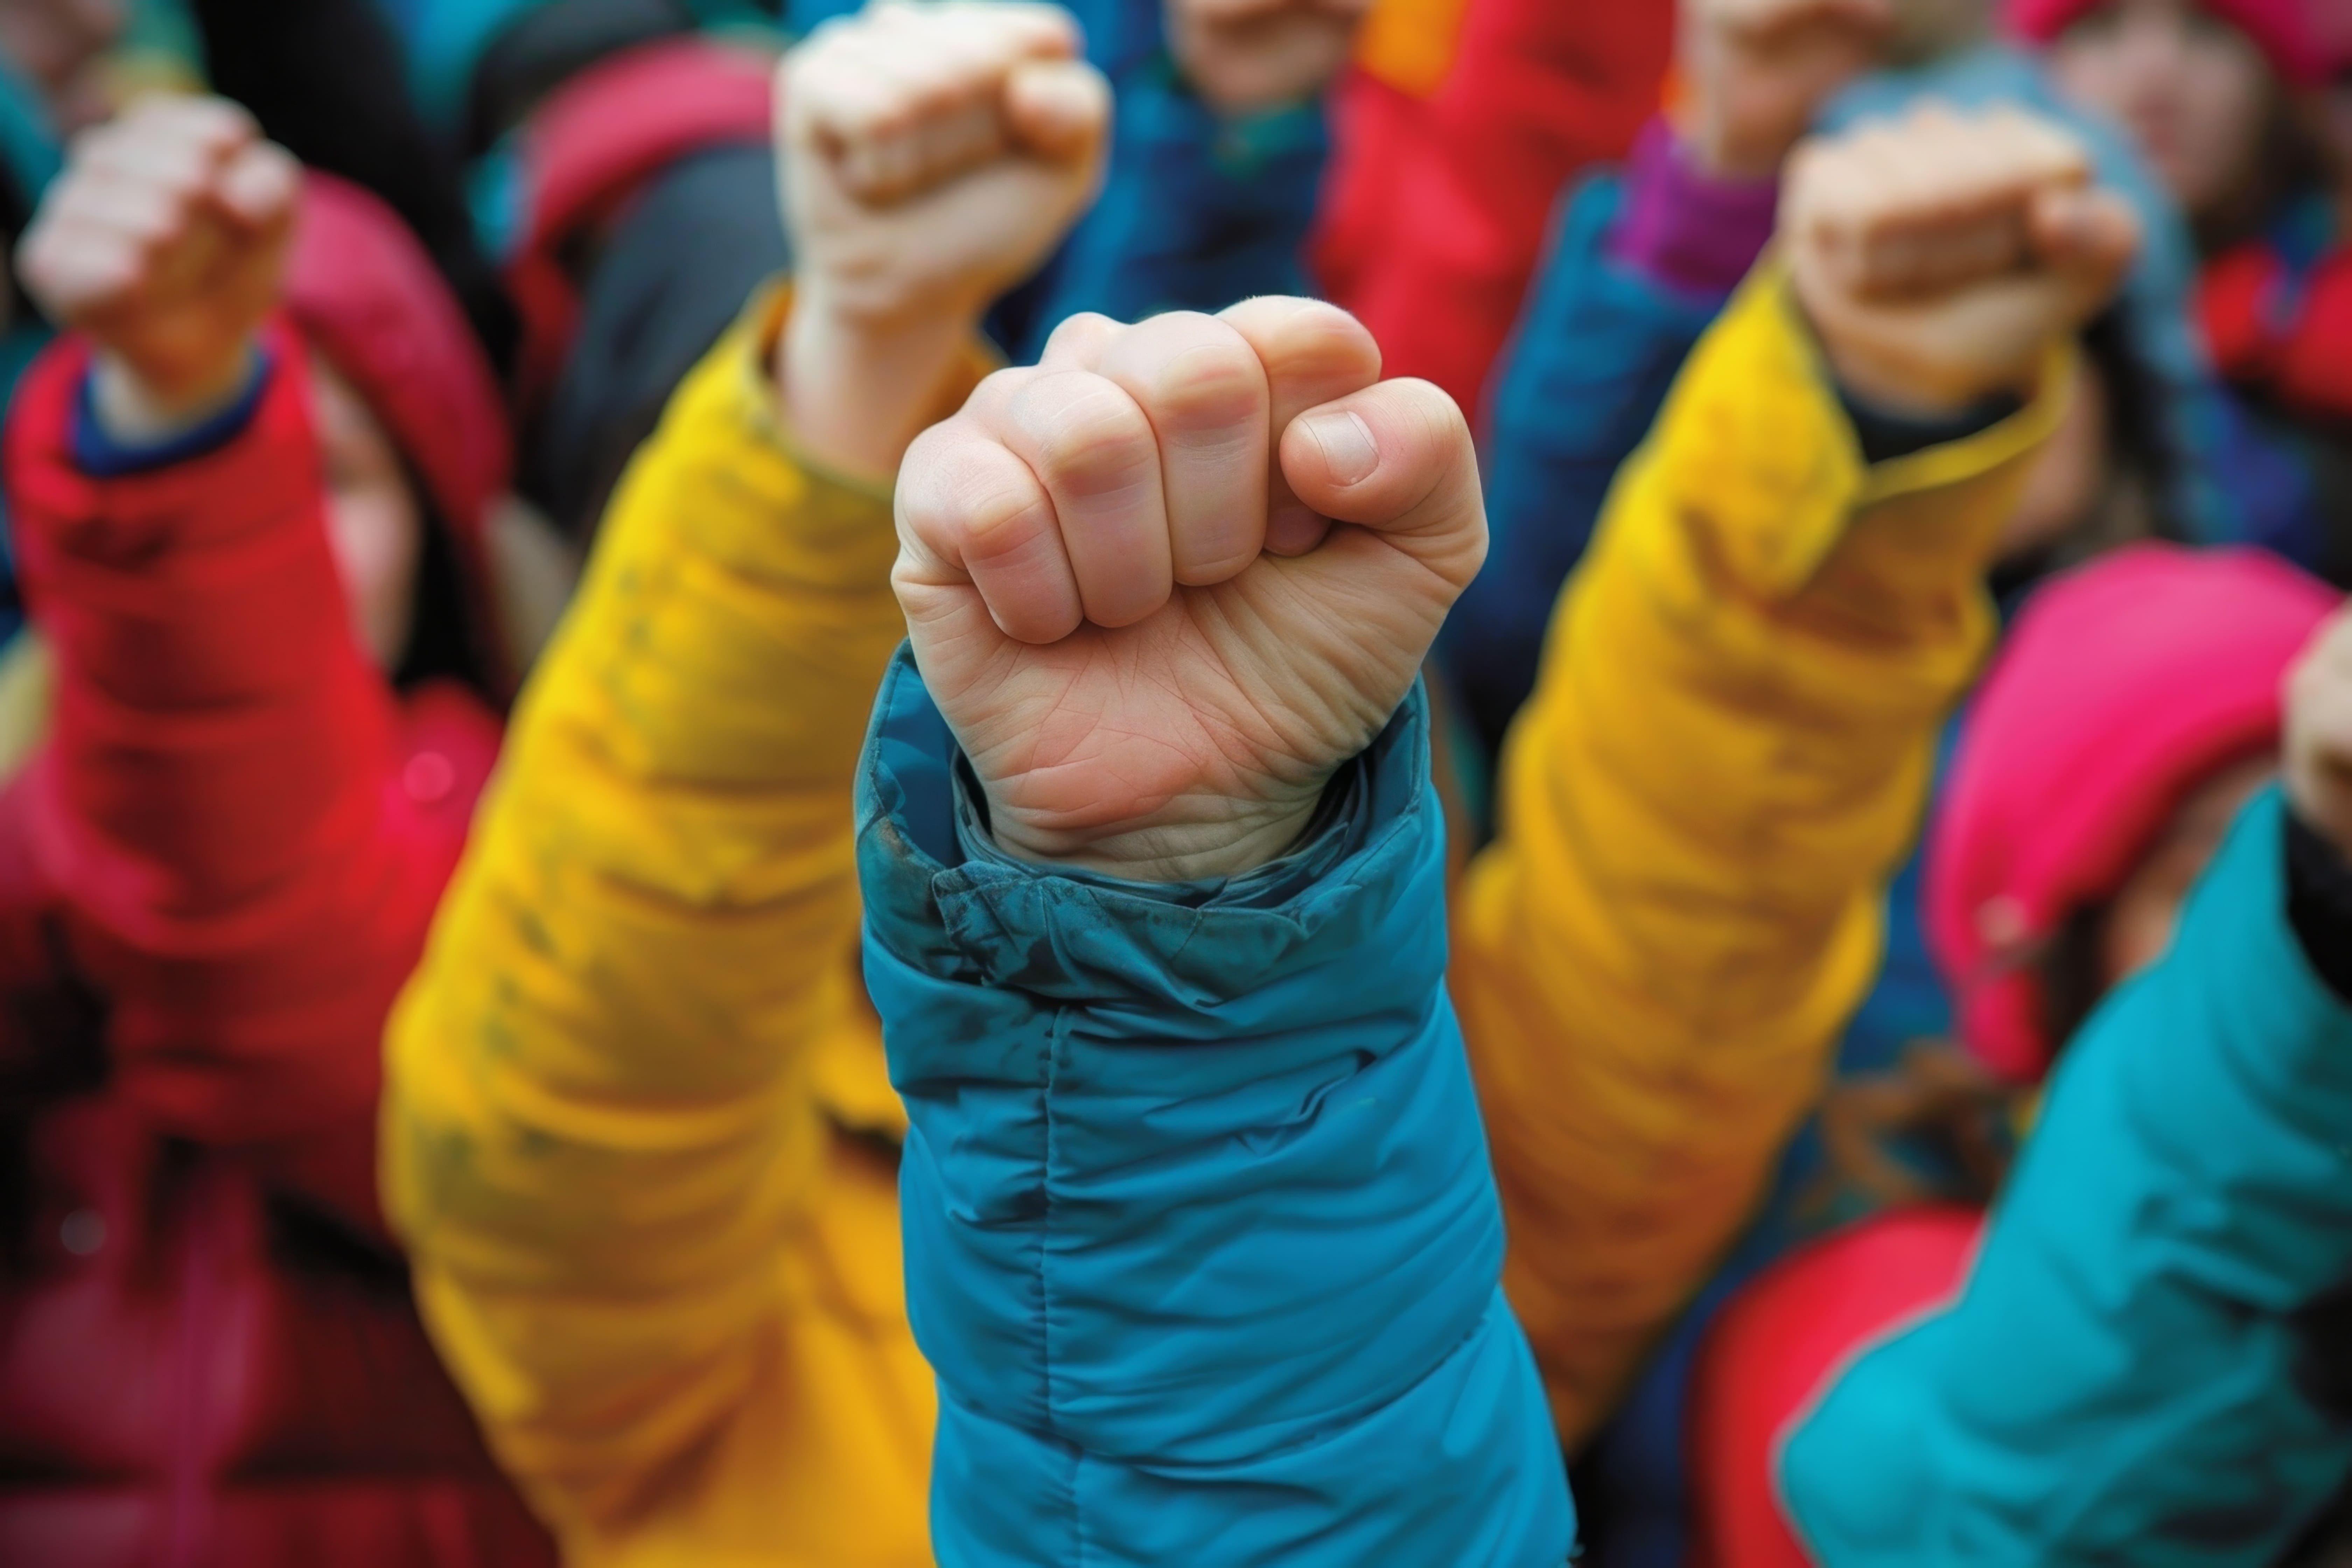 a group of people wearing coulorful jackets raising their arms in the air making fists